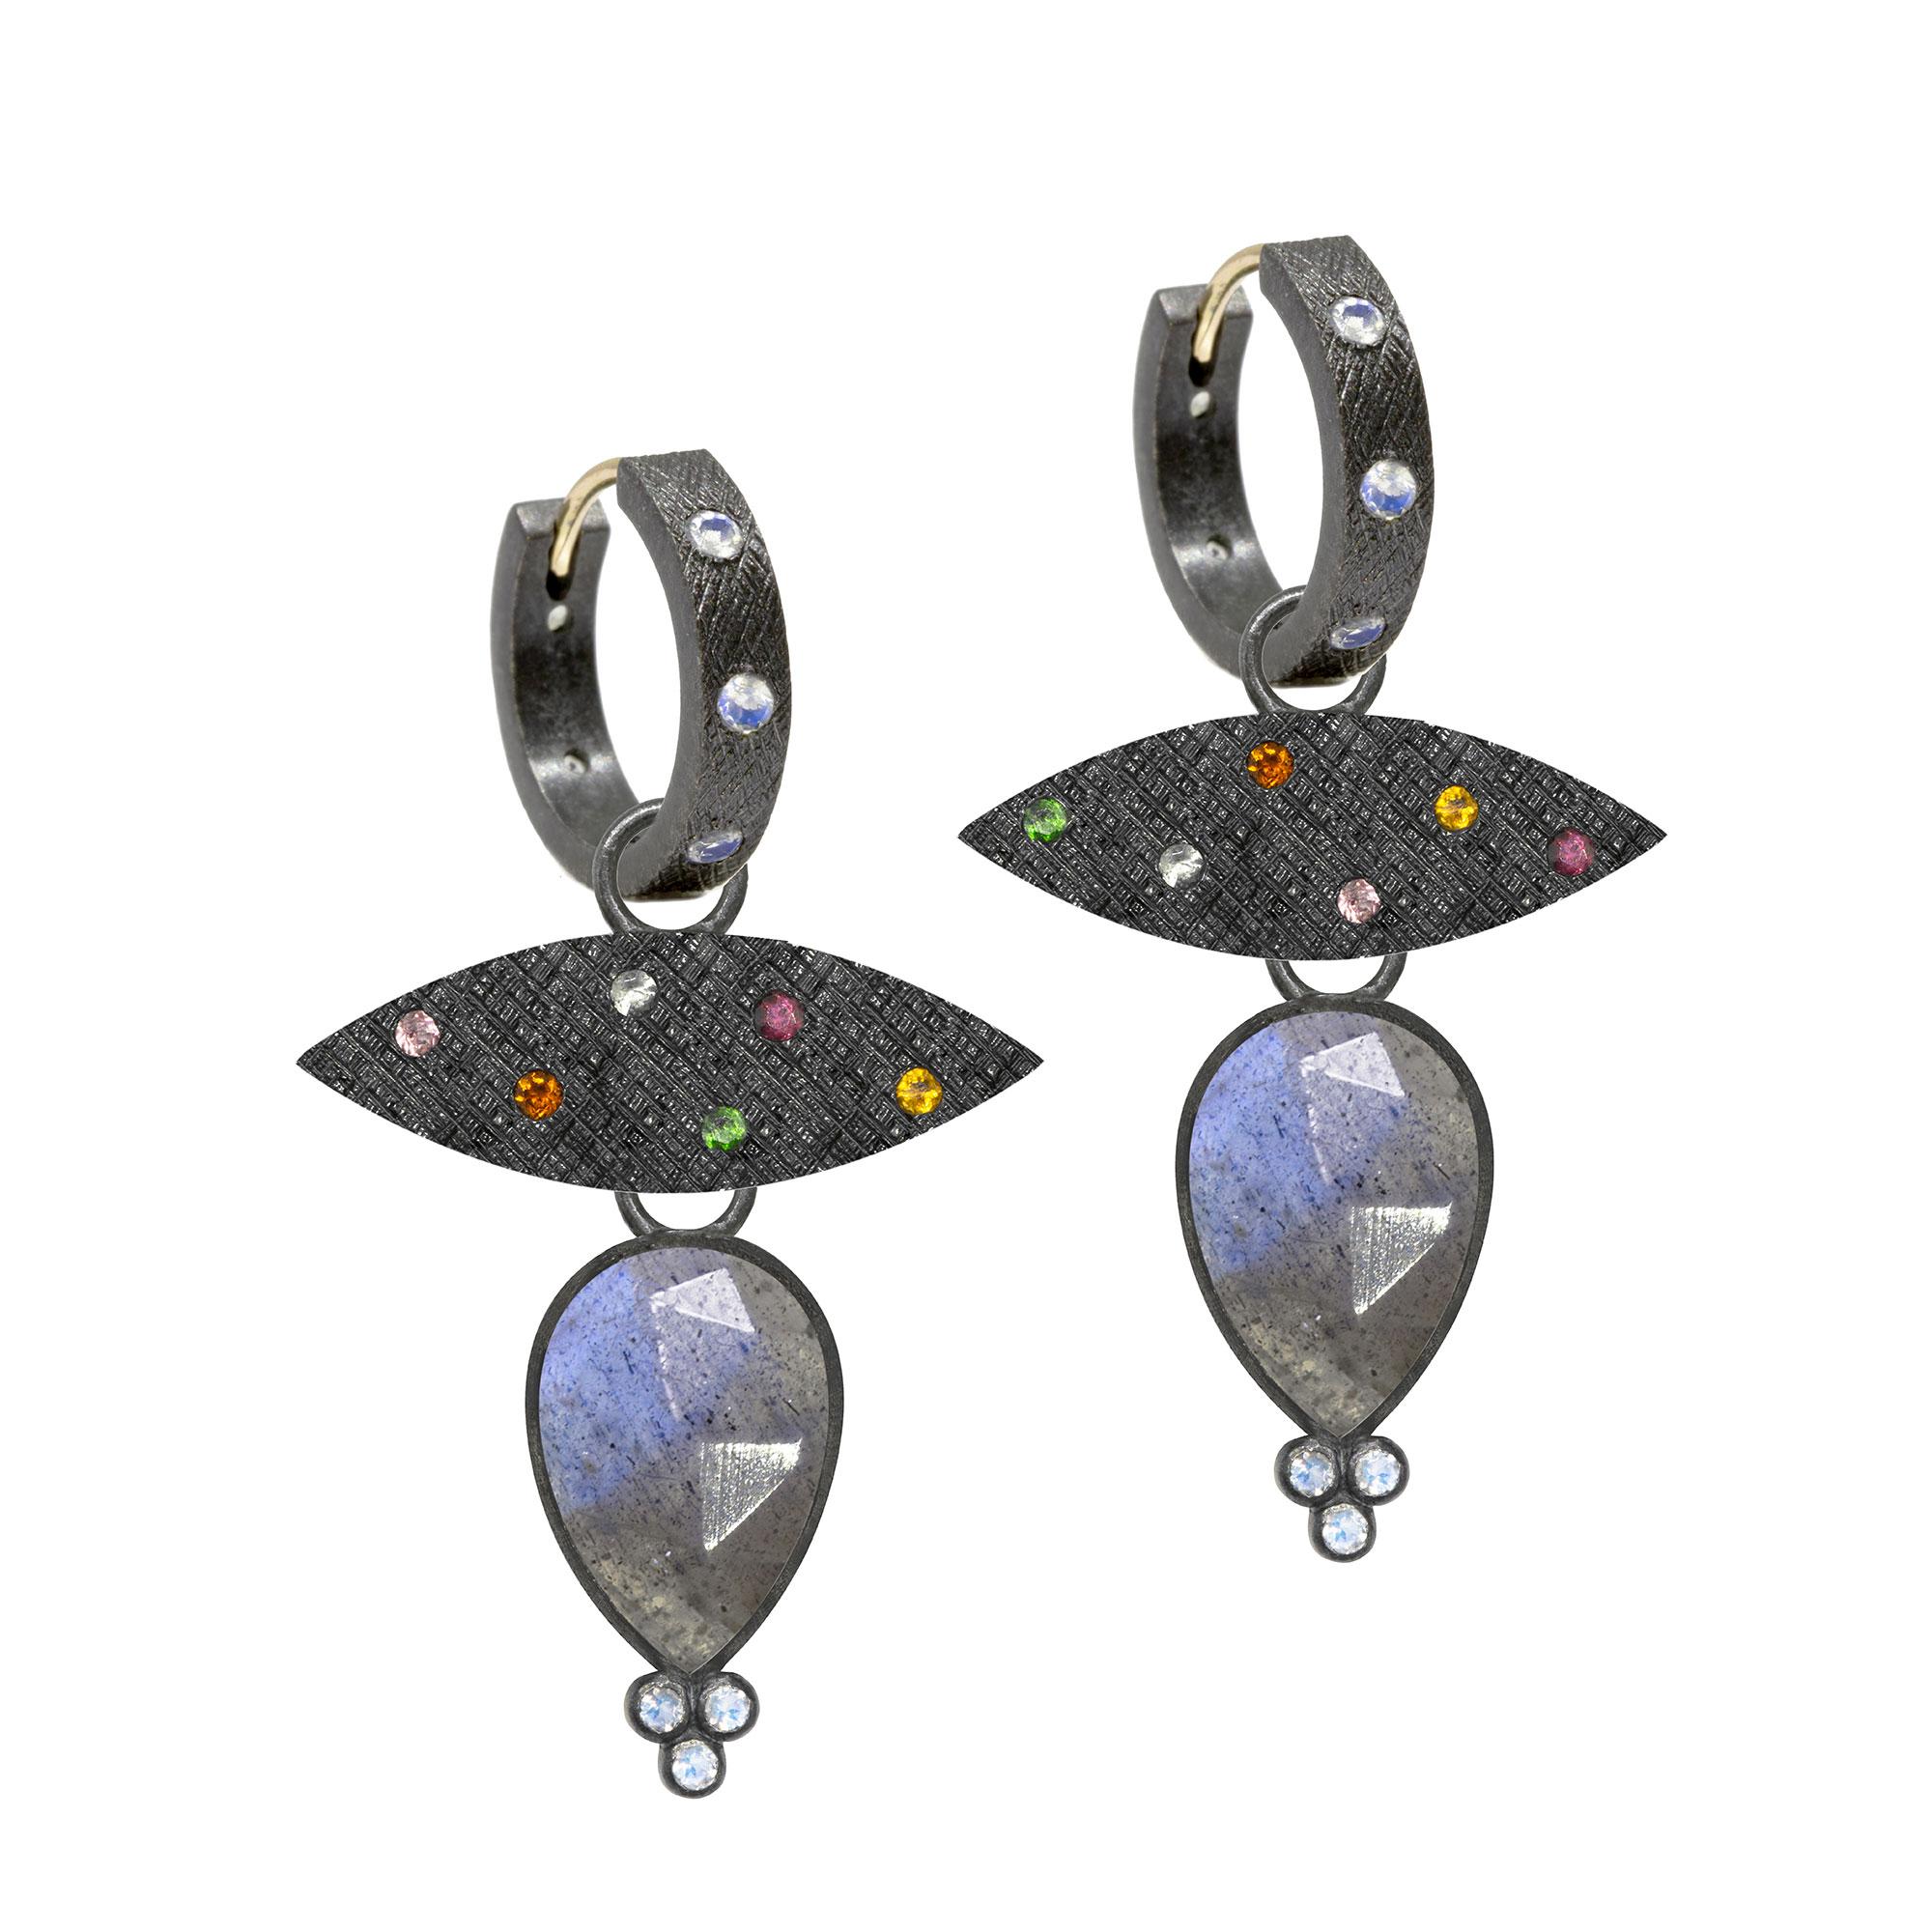 Nina Nguyen Design's patent-pending earrings have an element on the back of the stud or charm to allow these pieces to transformed into multi-use, stackable and convertible styling. It can be turned into a pendant and worn on a necklace, or used as